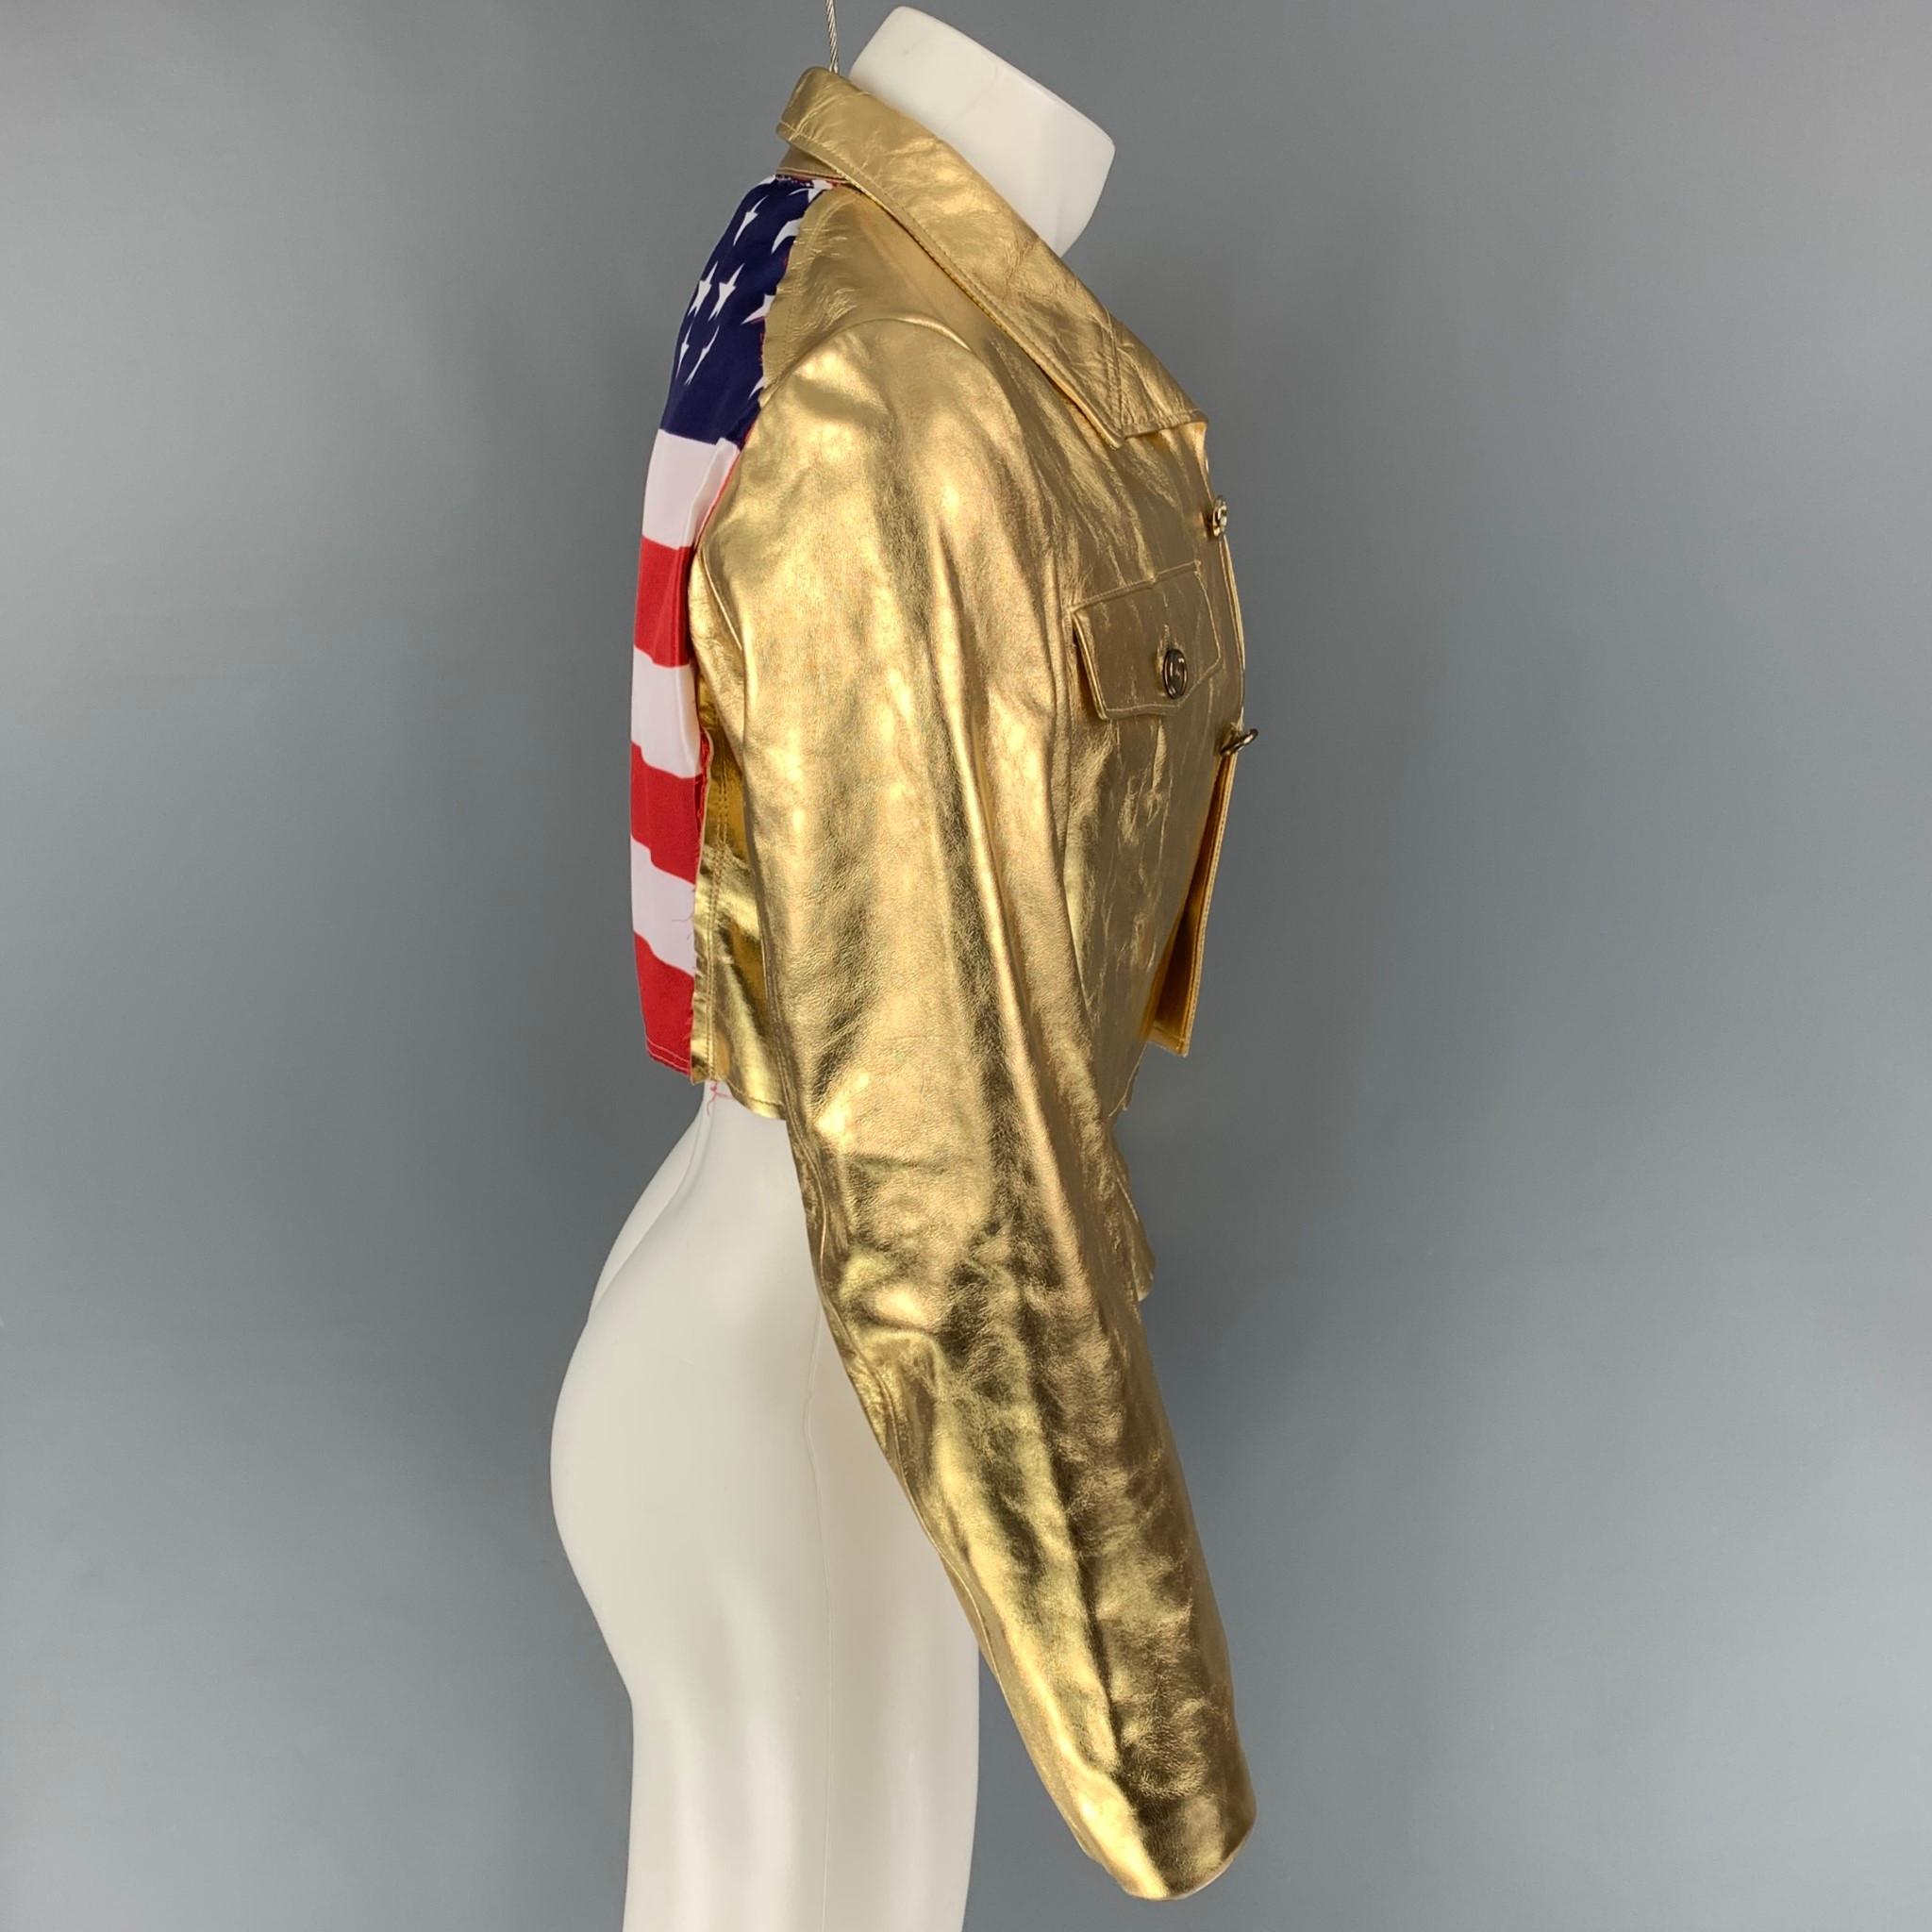 COMME des GARCONS jacket comes in a gold metallic leather featuring a pointed collar, front pockets, cropped, and a buttoned closure. Jacket has been customized with a american flag design. Made in Japan. 

Very Good Pre-Owned Condition. Minor seam